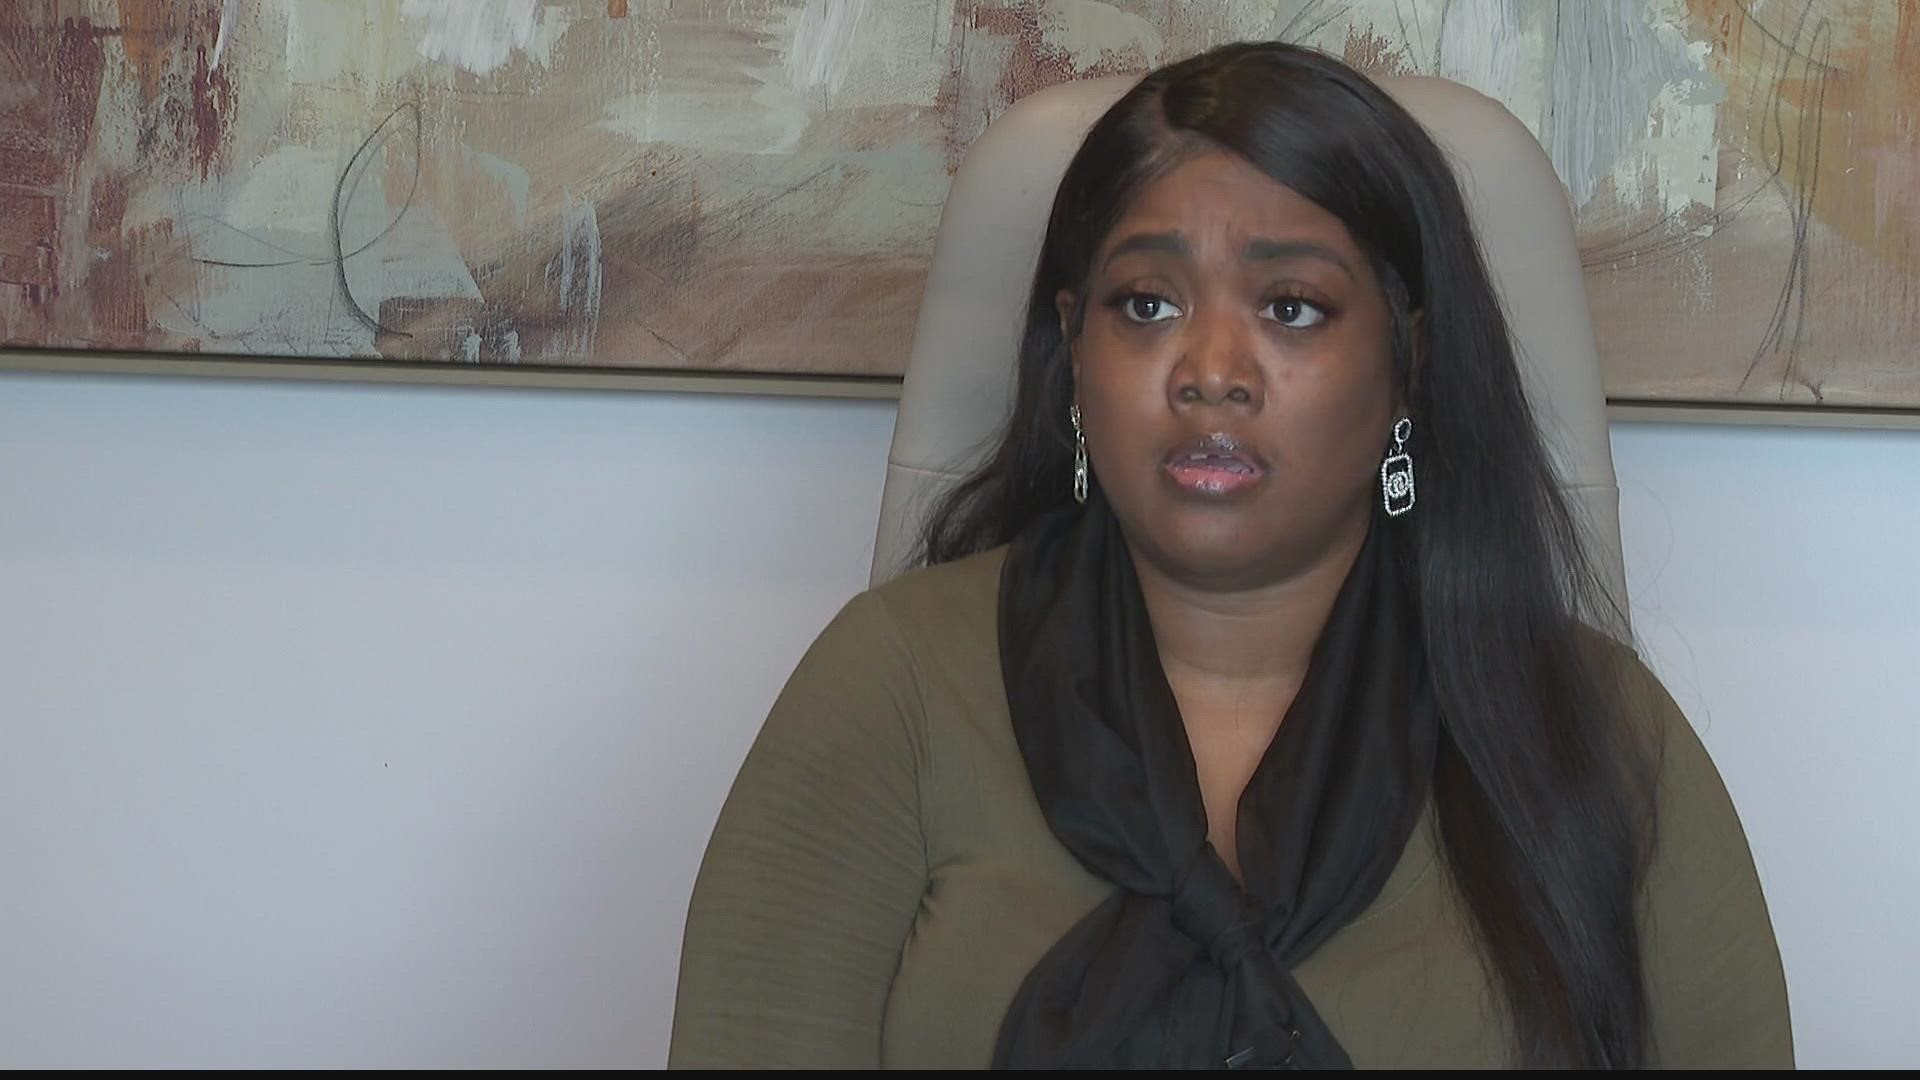 Khanay Yancey said she was trying to keep a man convicted of abuse away from her kids.